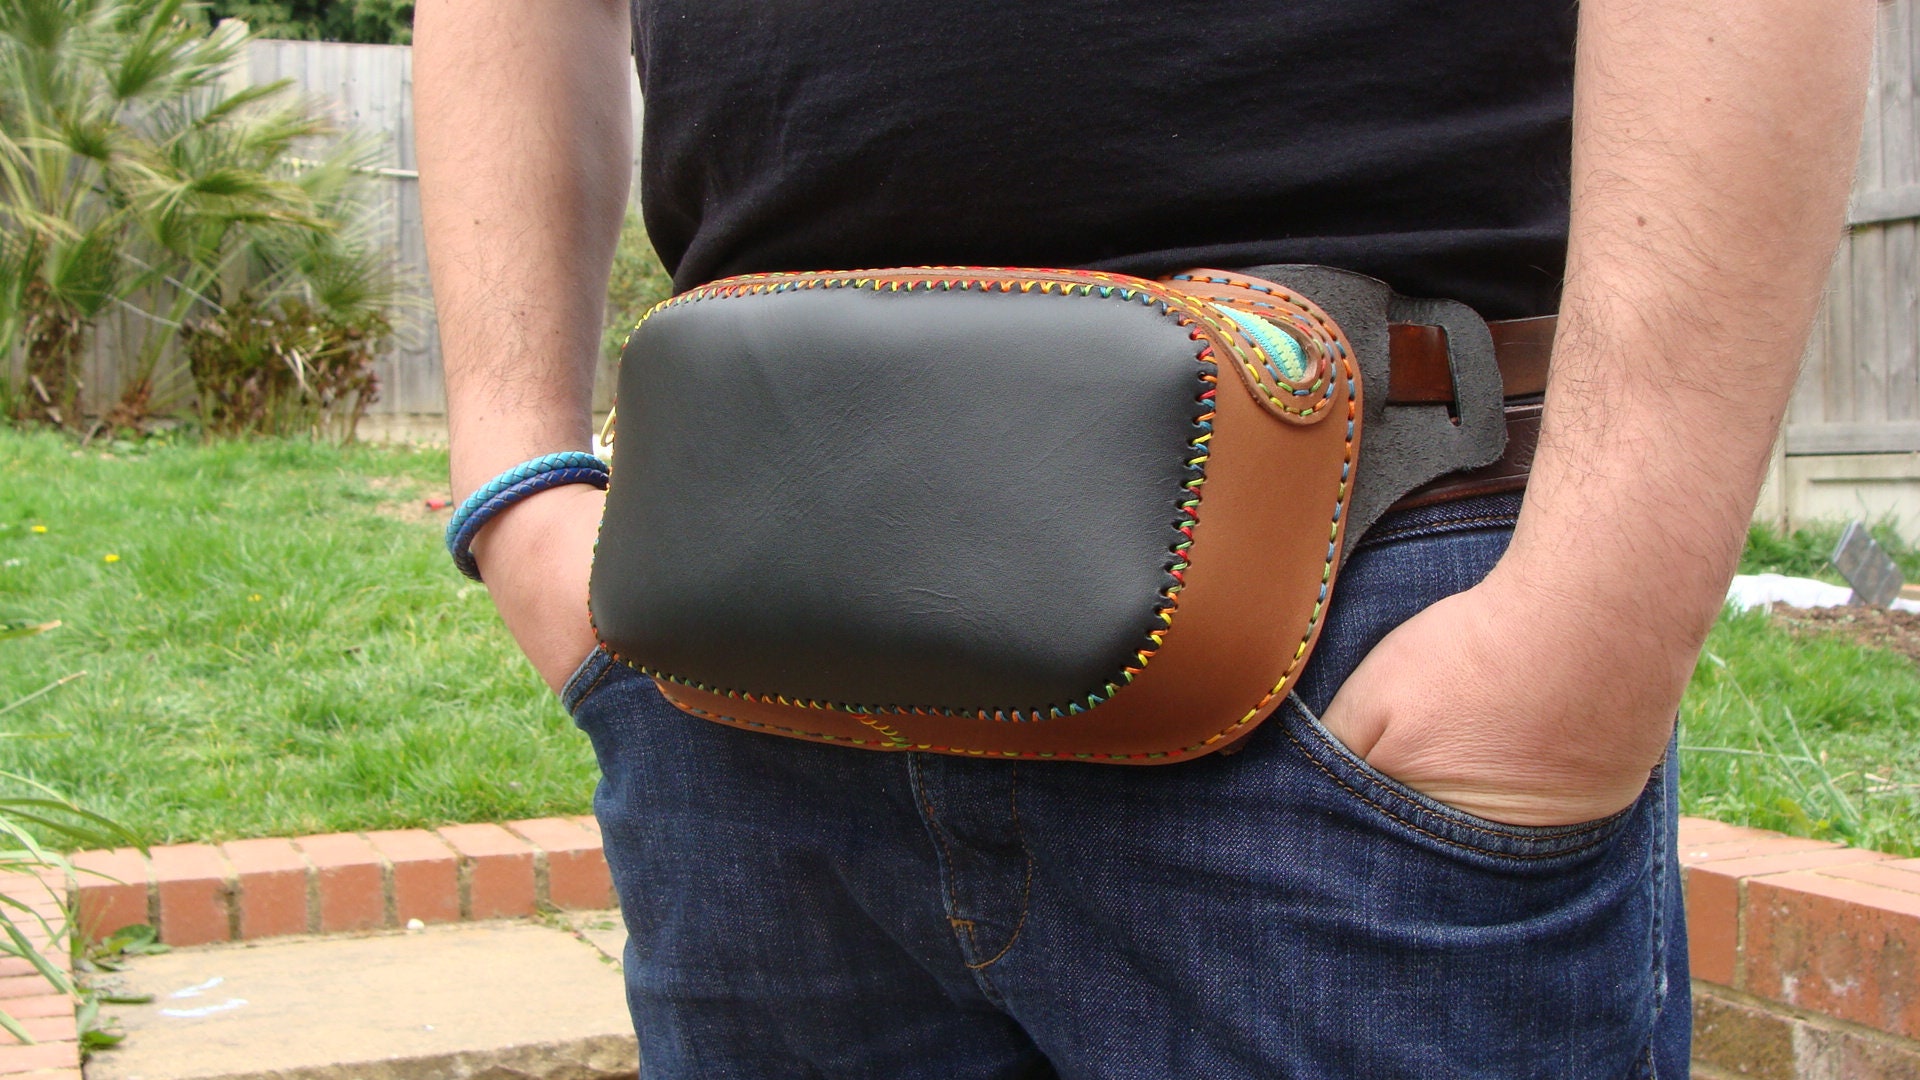 Men's or Women's Black Leather Hip Bag Small 